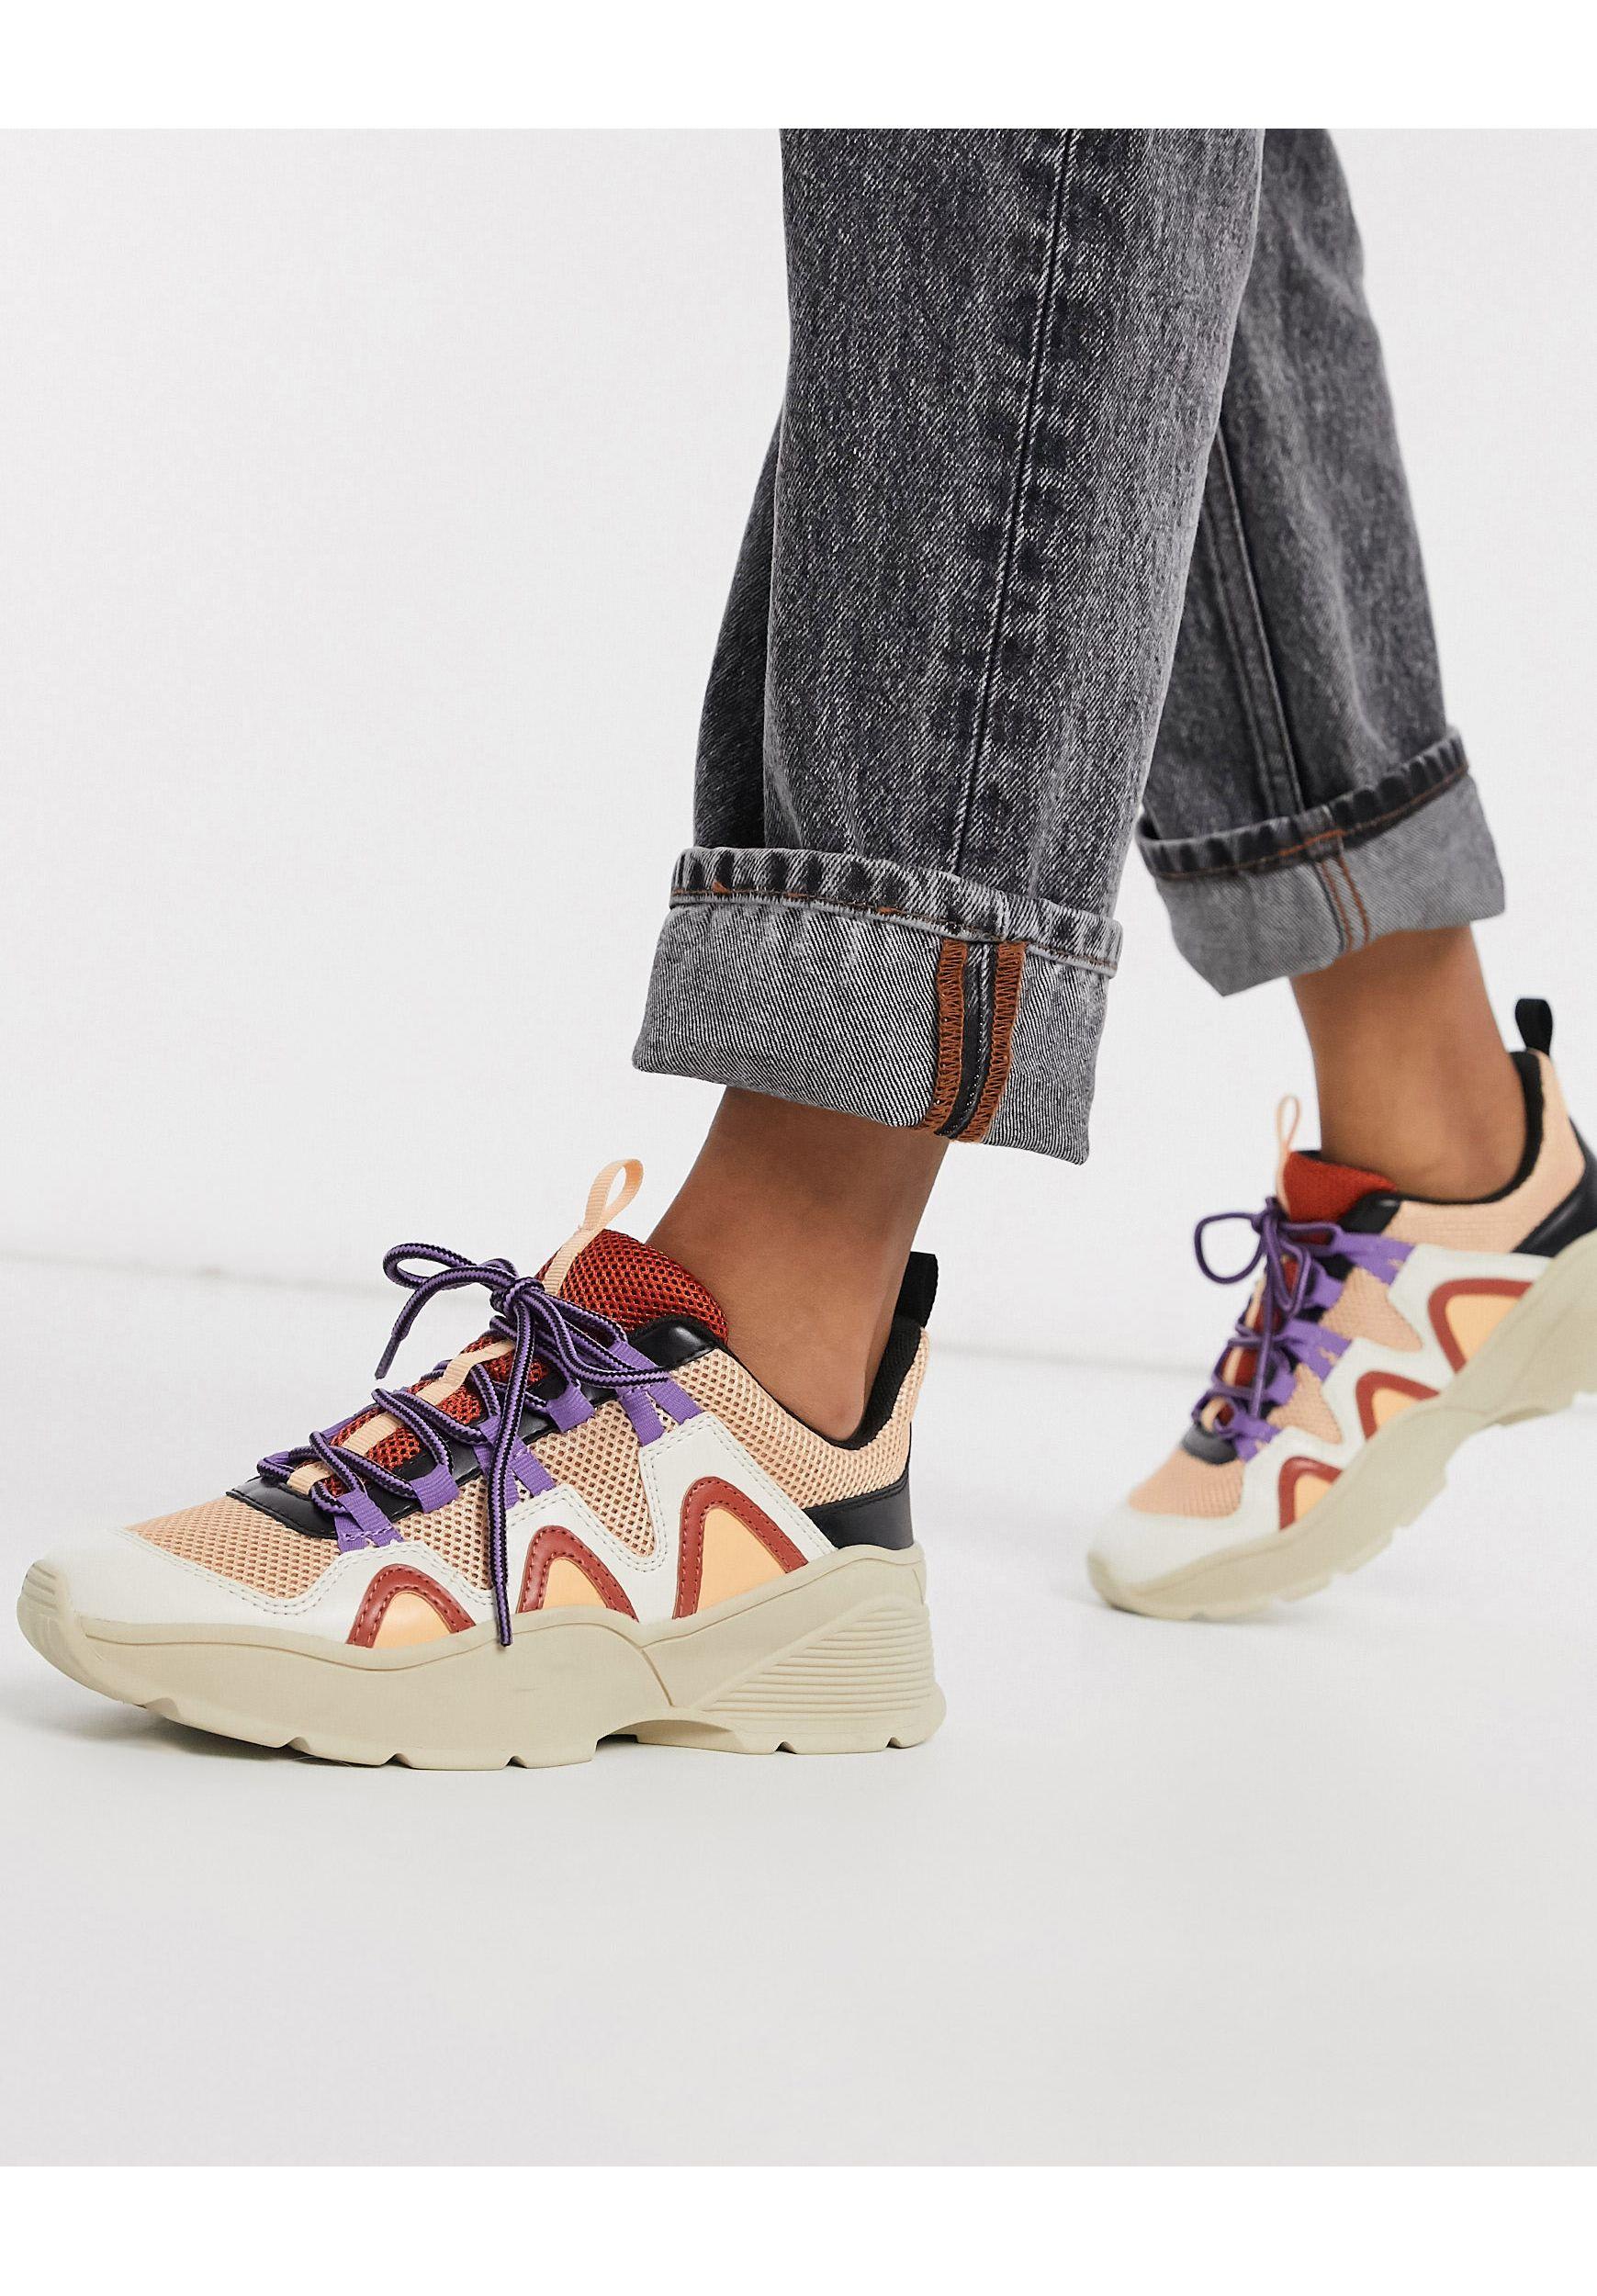 Meekness Cape poultry Monki Rubber Mesh And Pu Colour Block Chunky Sneaker | Lyst